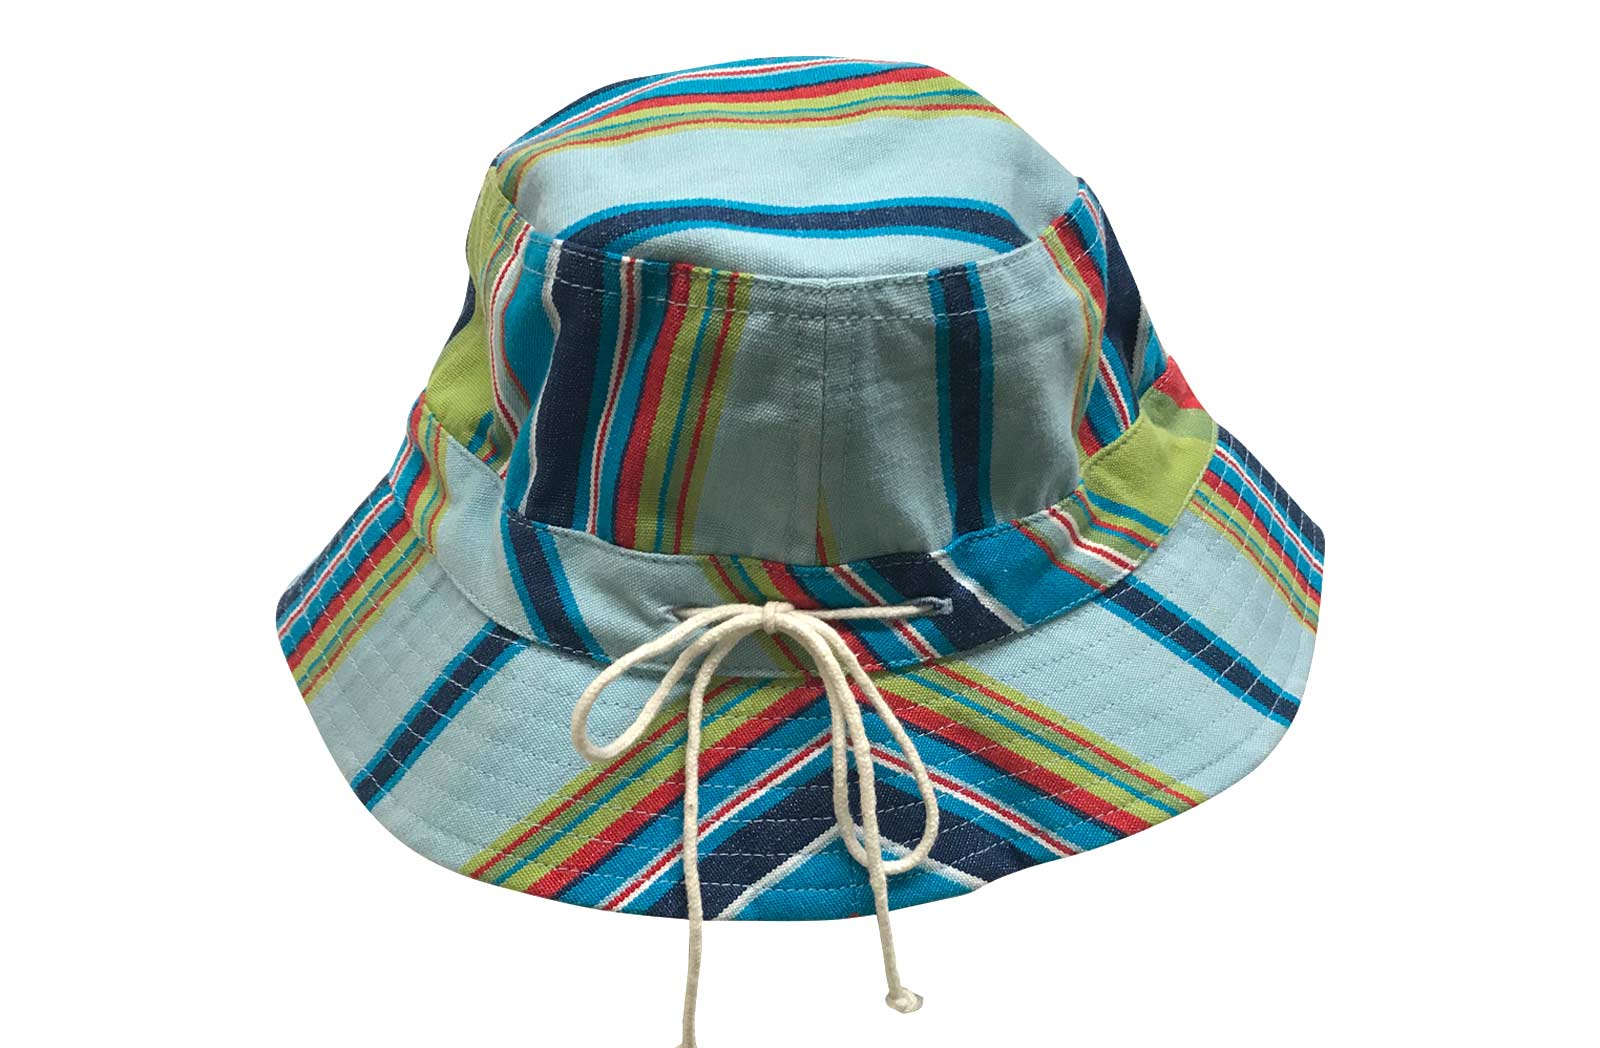 Pale Blue, Navy, Turquoise Striped Kids Sun Hat